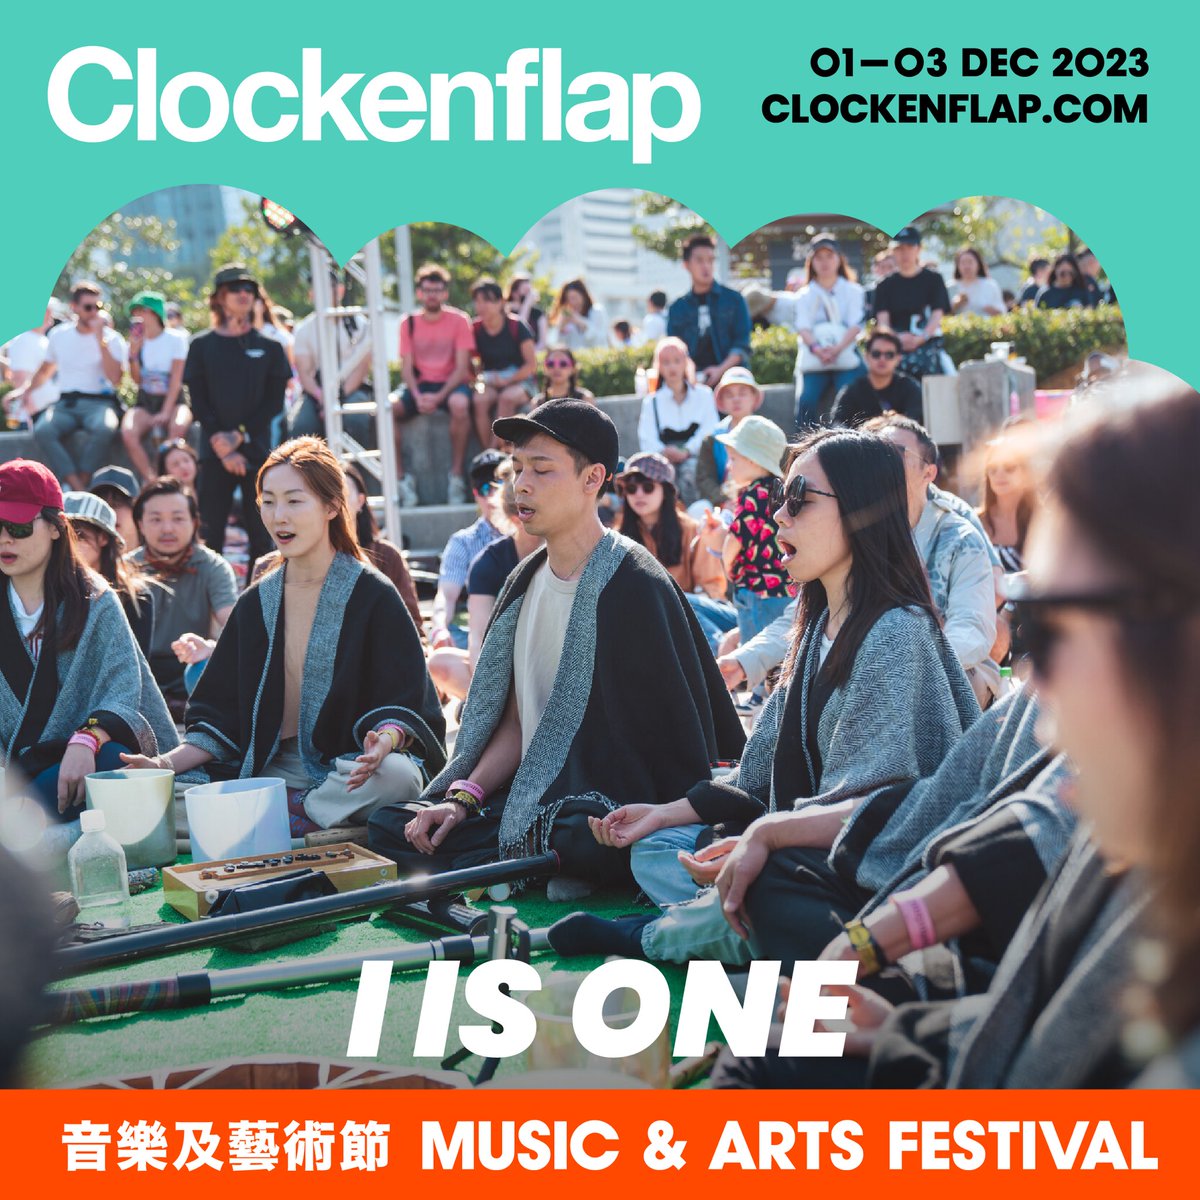 Founded in 2020 by a group of friends and local creatives who love playing music together, I Is One is on a mission to bring the simple joy of playing music to the world. Tickets: ticketflap.com/clockenflapdec…